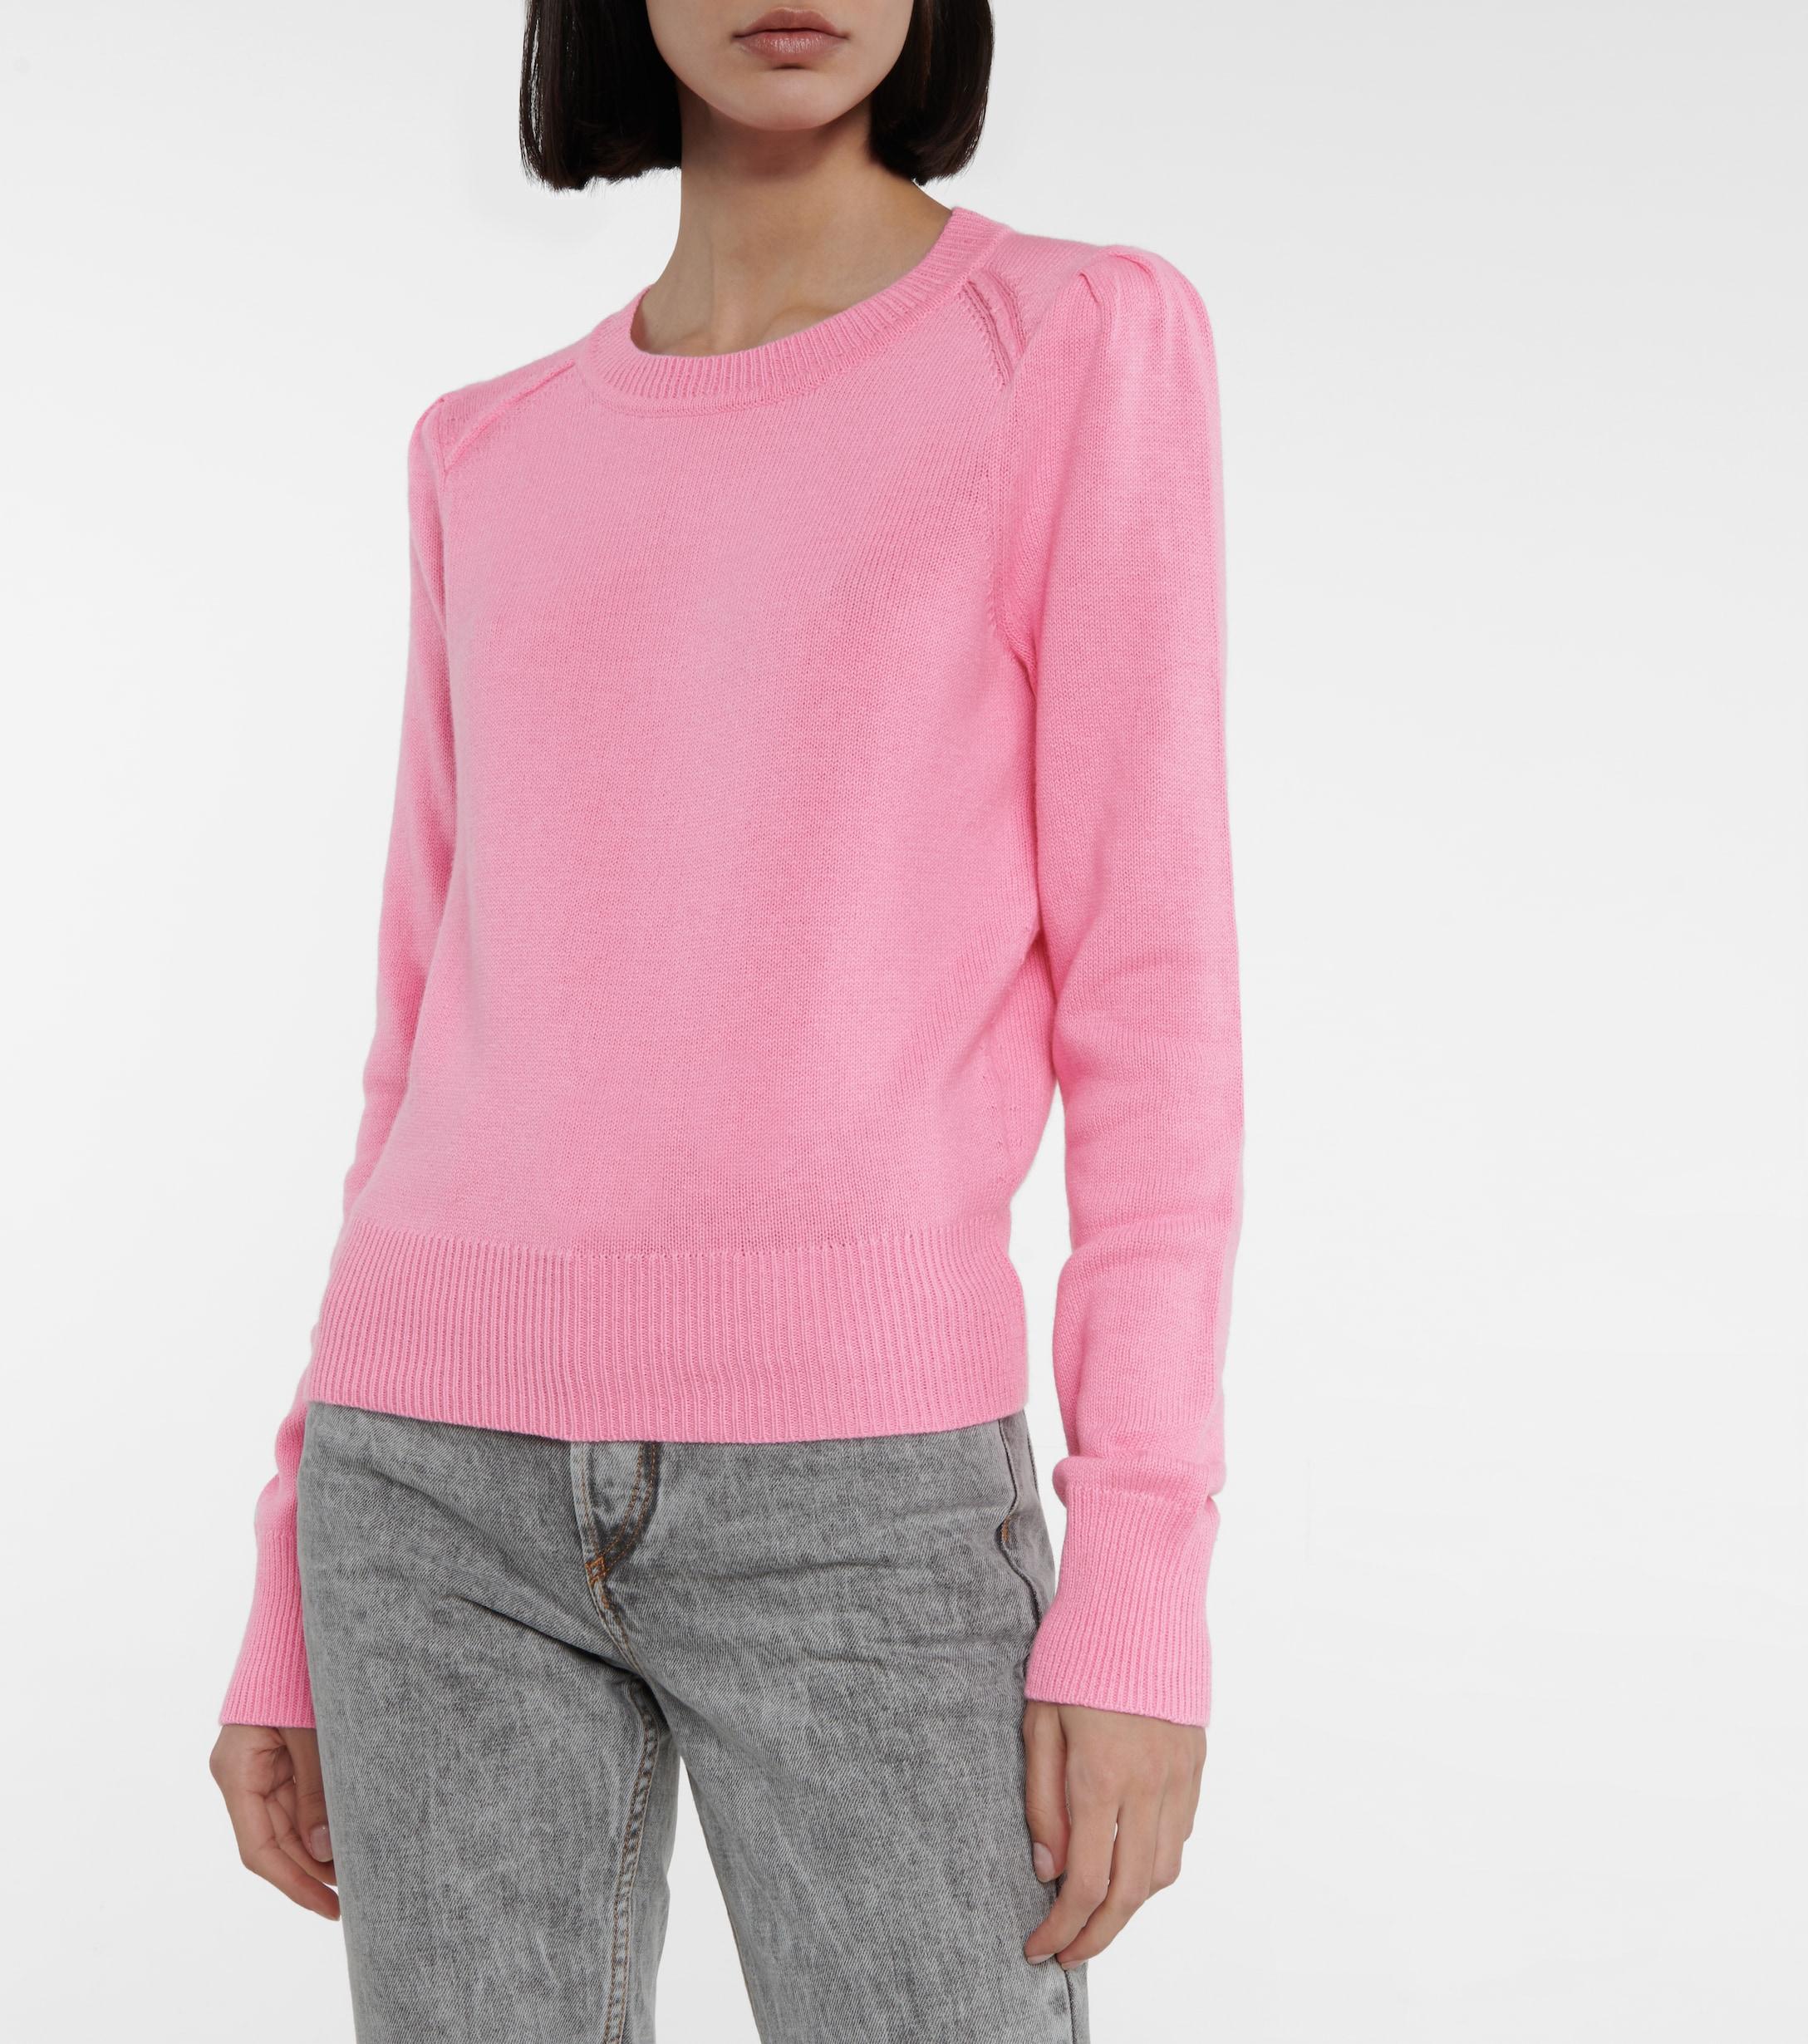 Étoile Isabel Marant Kleely Cotton And Wool Sweater in Pink - Lyst